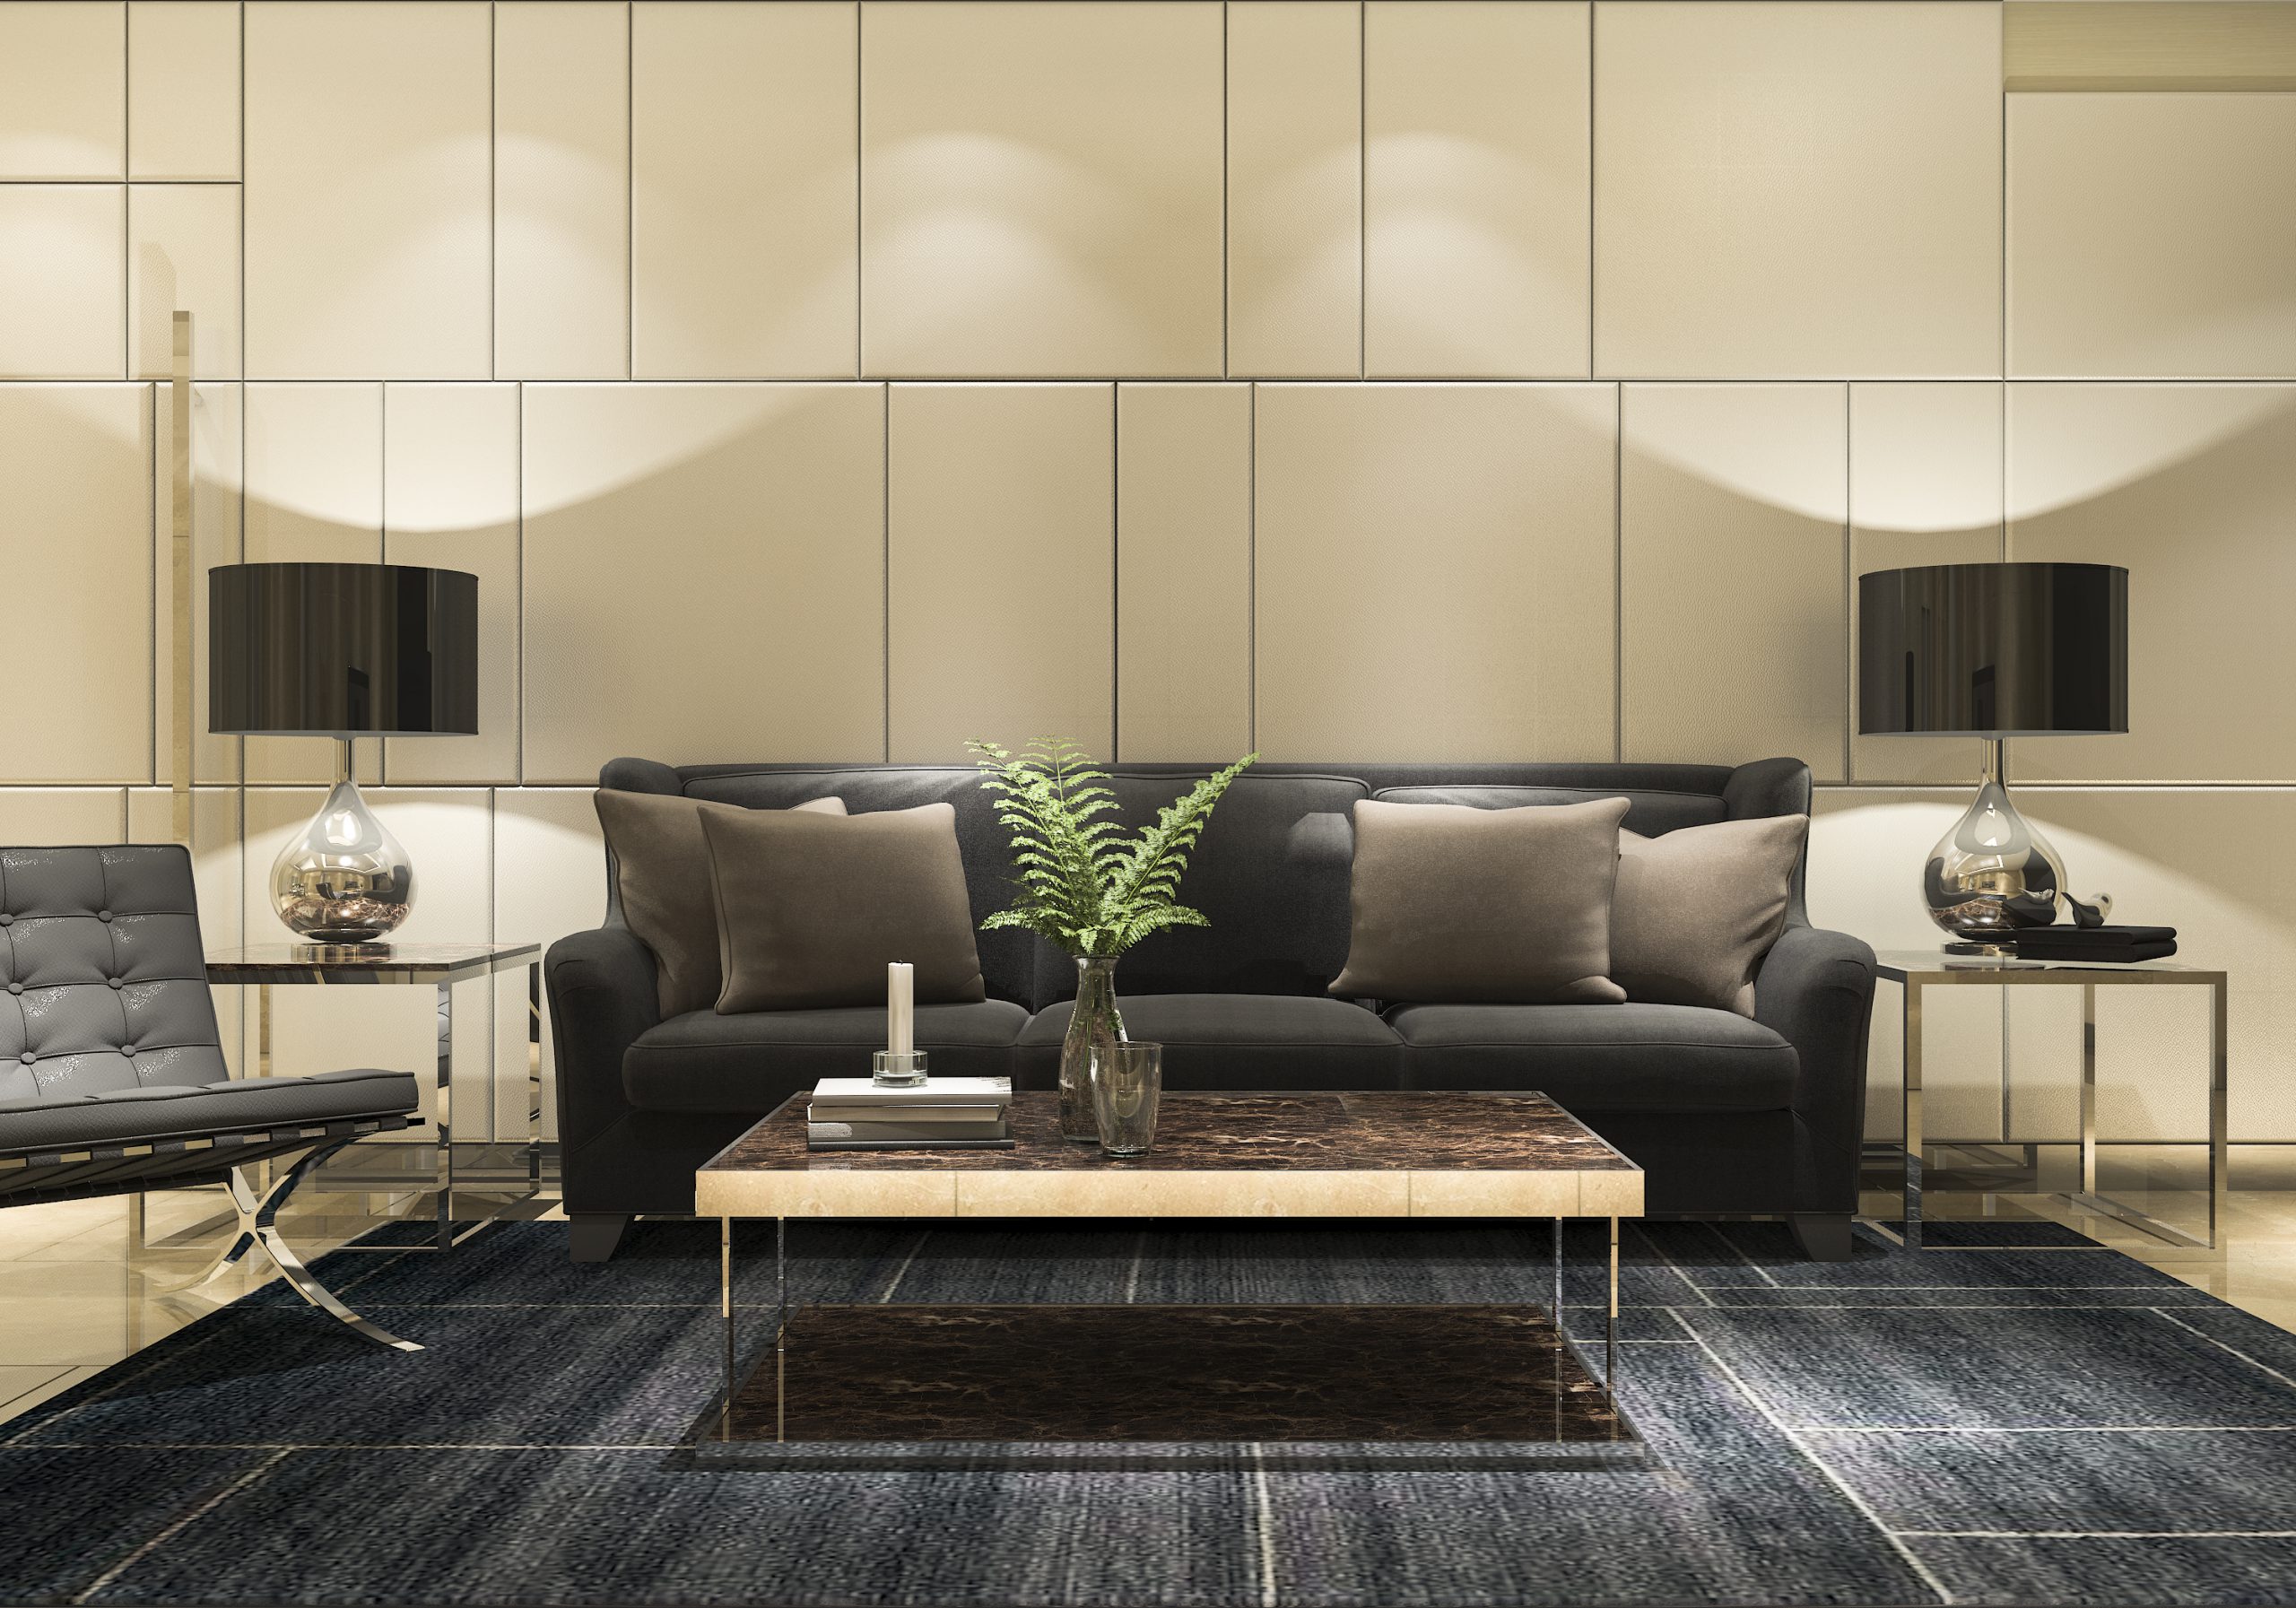 3d Rendering Luxury And Modern Living Room With Go 2021 08 28 09 59 54 Utc